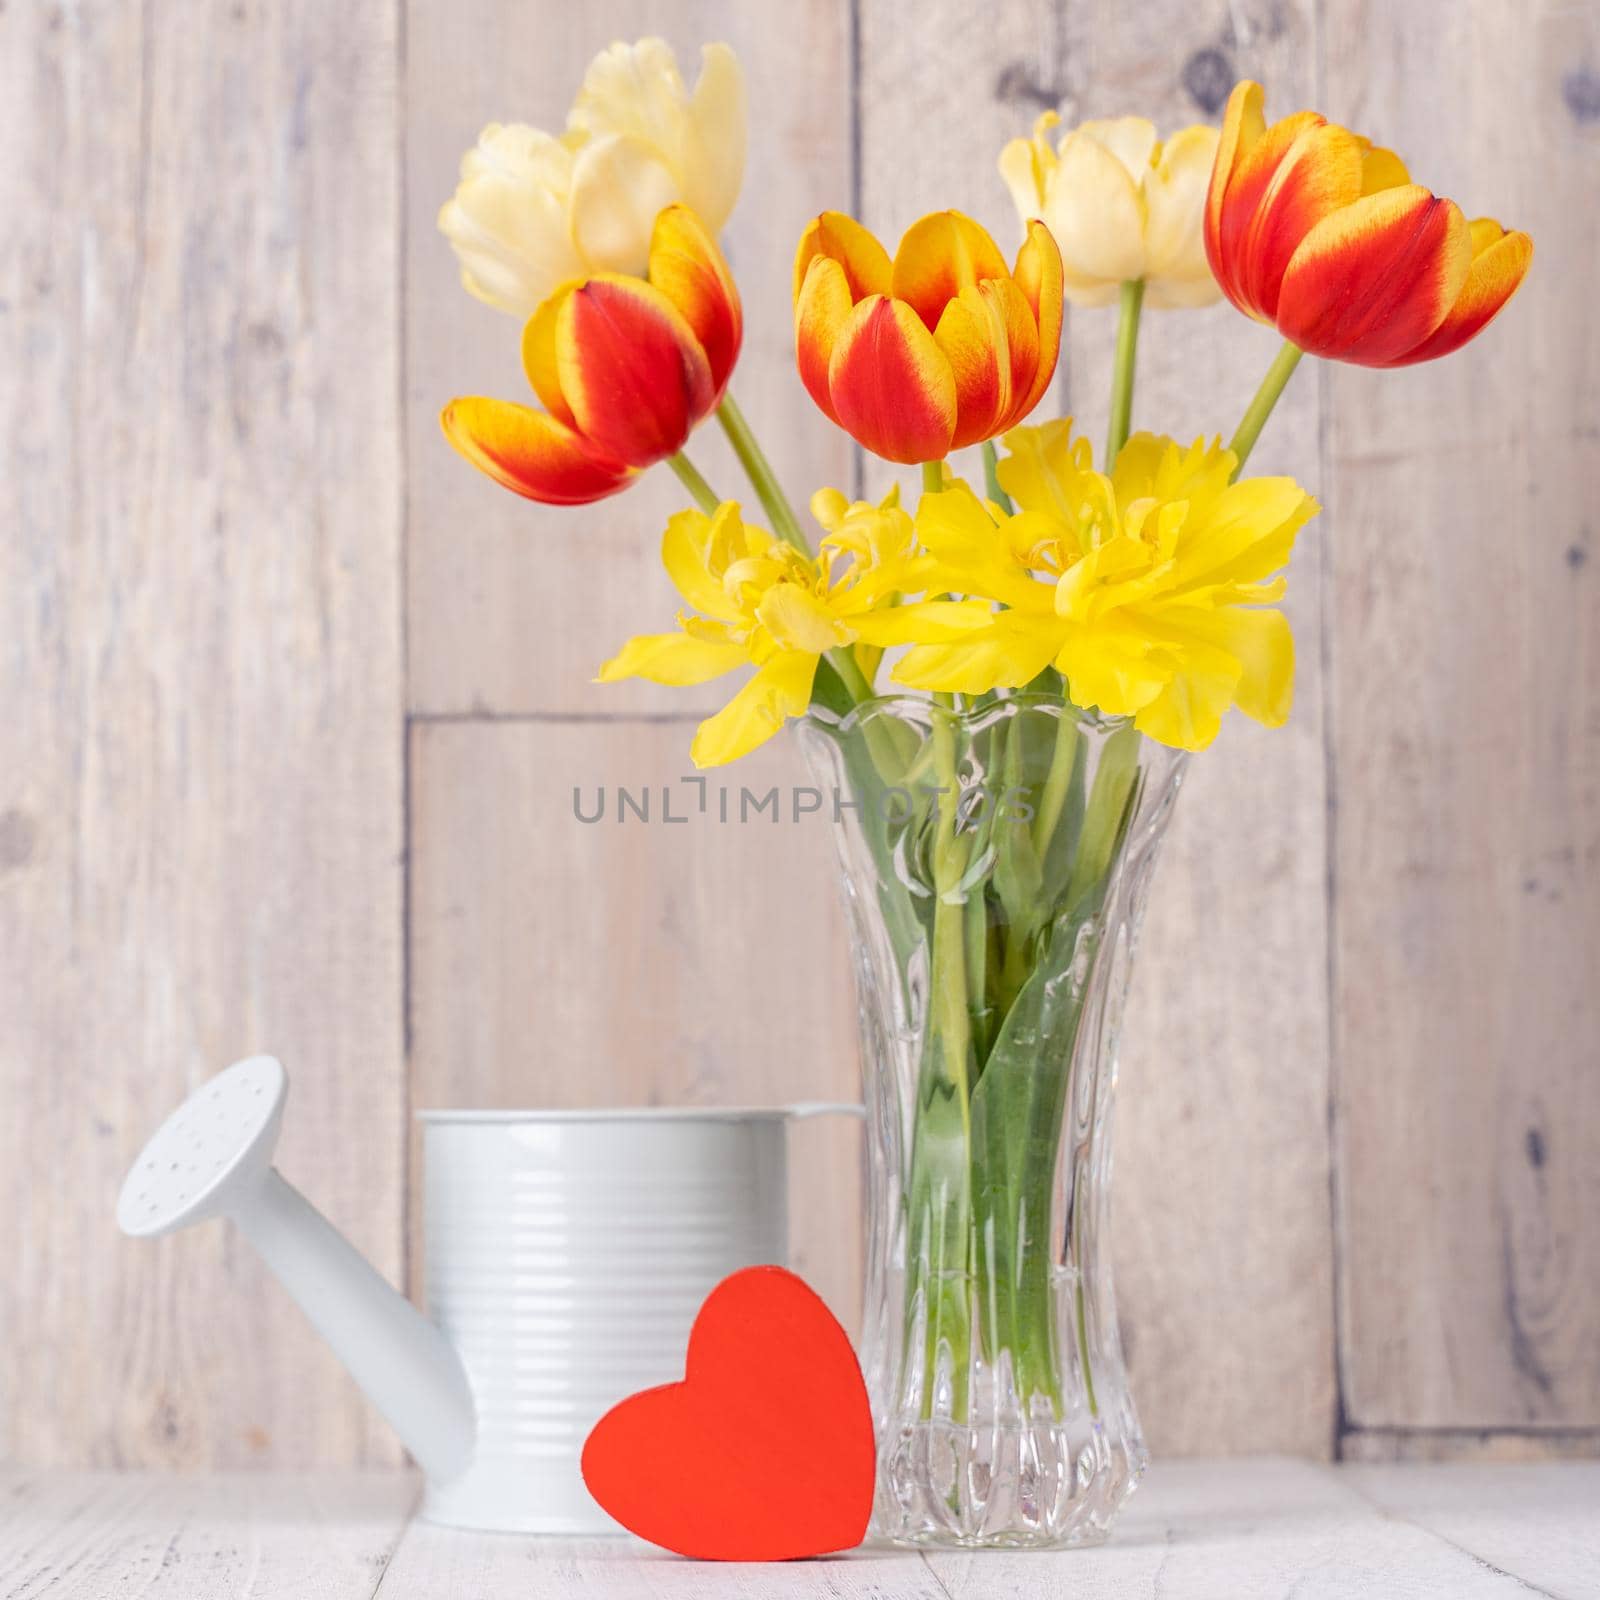 Tulip flower arrangement in glass vase with heart greeting, watering can decor on wooden table background wall, close up, Mother's Day design concept. by ROMIXIMAGE